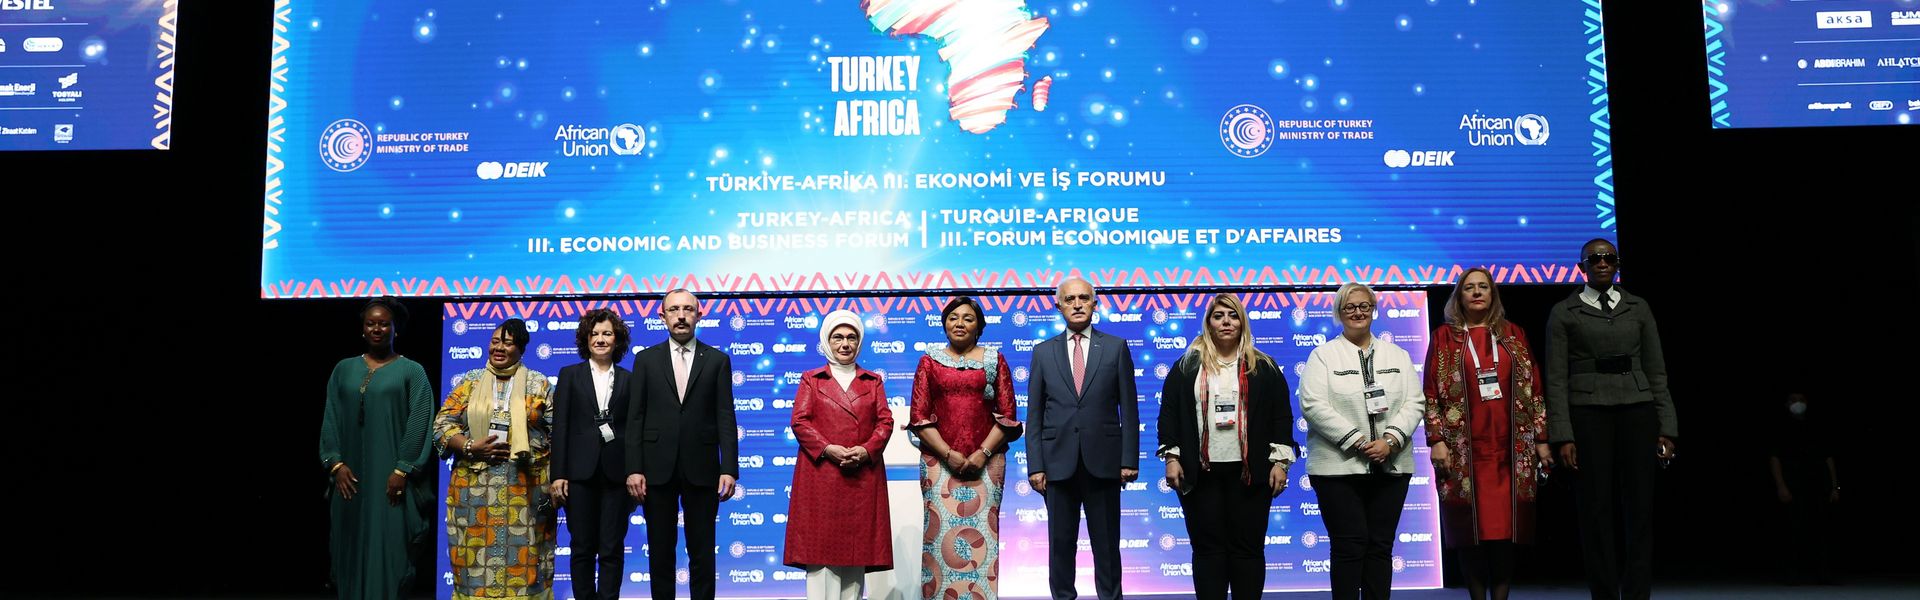 Turkey-Africa Women Leadership Dialogue Panel within the Turkey-Africa Economic and Business Forum in Istanbul on October 22, 2021. 